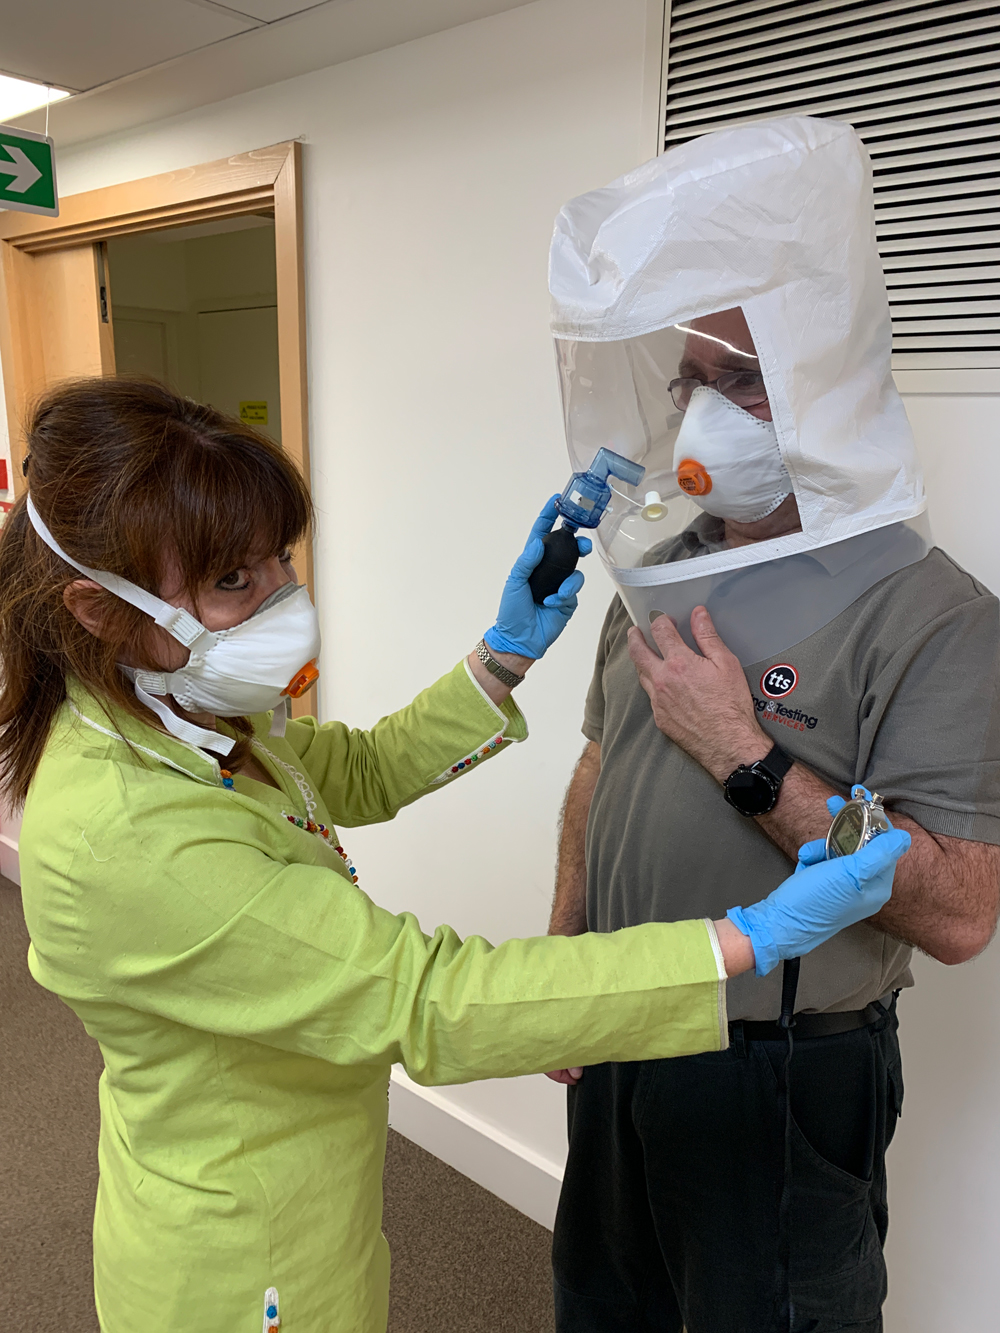 Competent person in fit mask testing